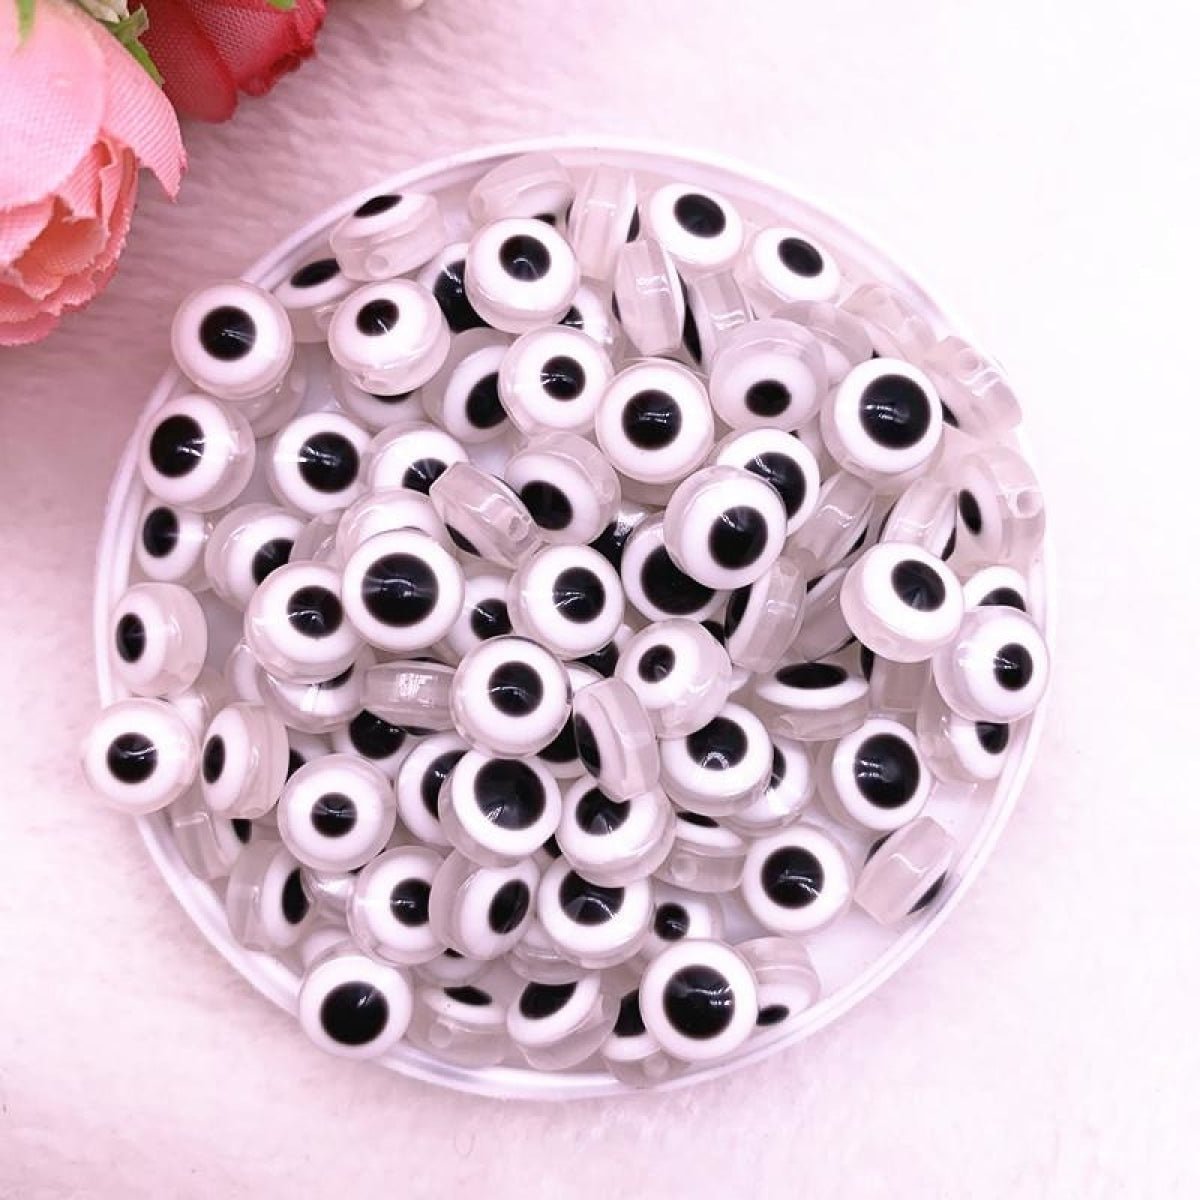 48pcs 8/10mm Oval Resin Spacer Beads Double Sided Eyes for Jewellery Making DIY Bracelet Beads Set B - White 8mm - Asia Sell